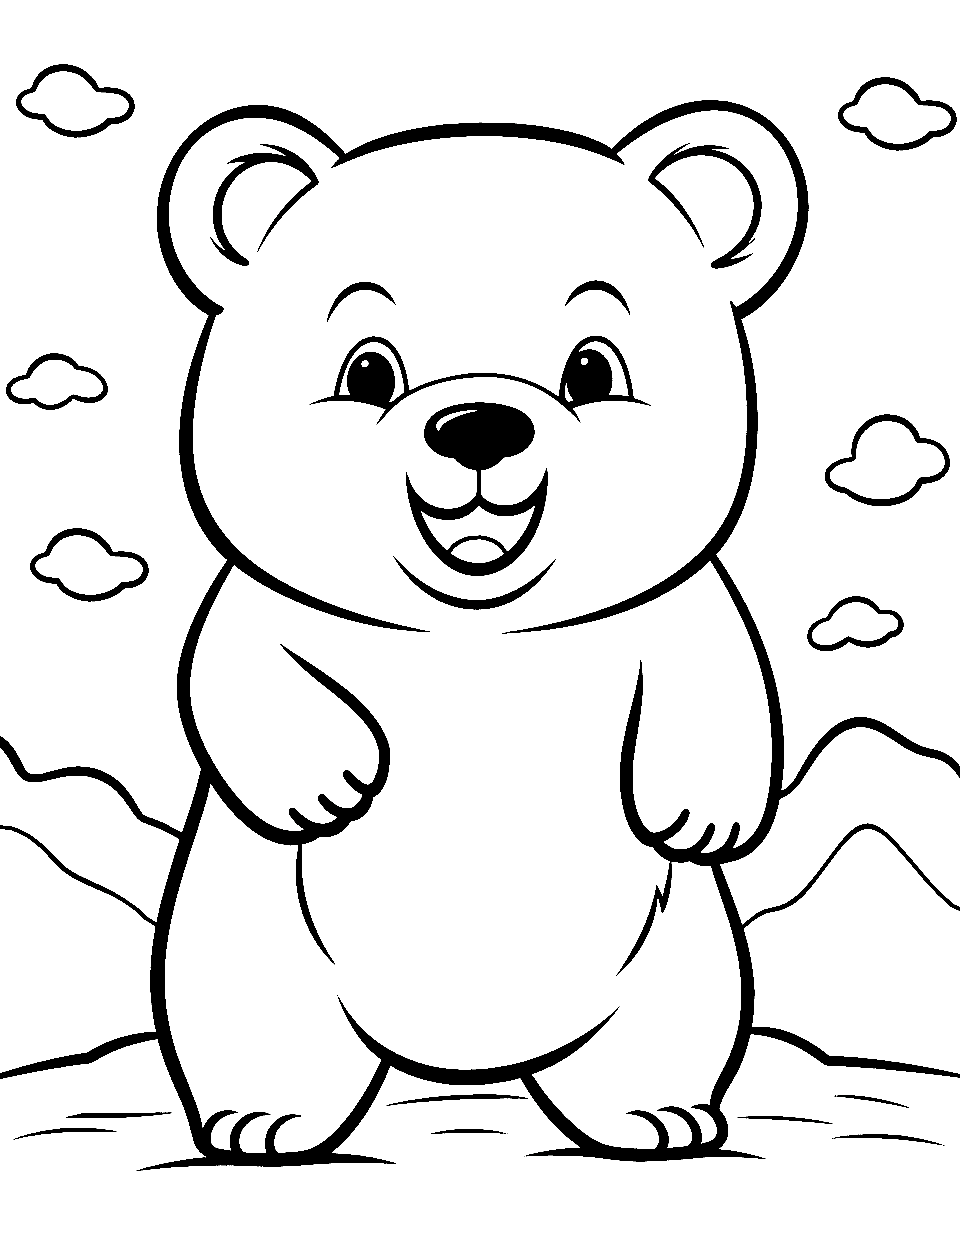 Chibi Cheer Bear Coloring Page - A cheerful, chibi-style bear with a wide smile.